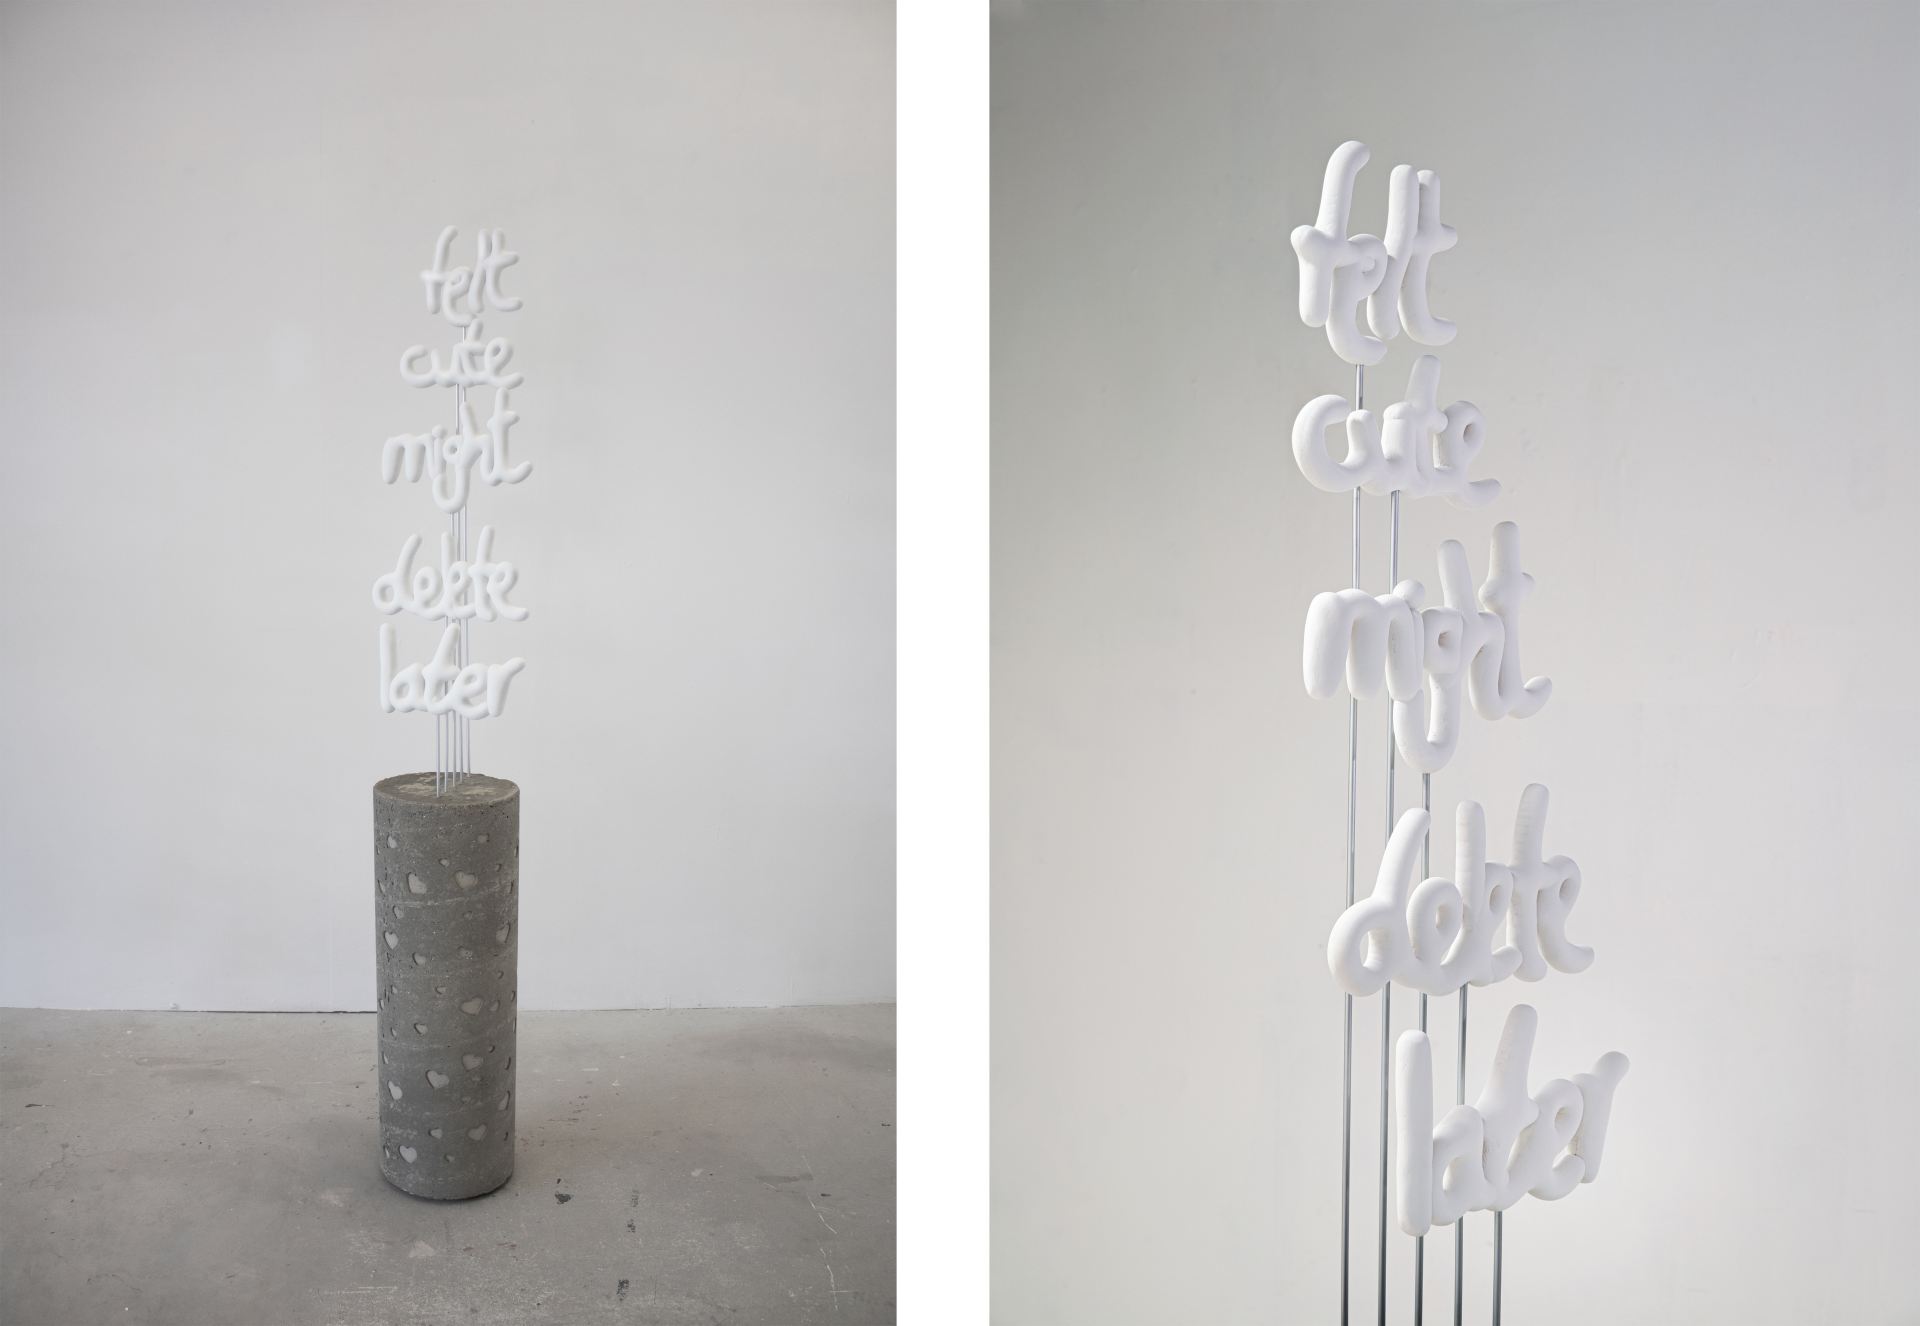 An image of balloon-shaped handwriting, 3d printed in white plastic, that reads “Felt cute might delete later”. It is attached by aluminium rods to a concrete plinth covered with debossed hearts.